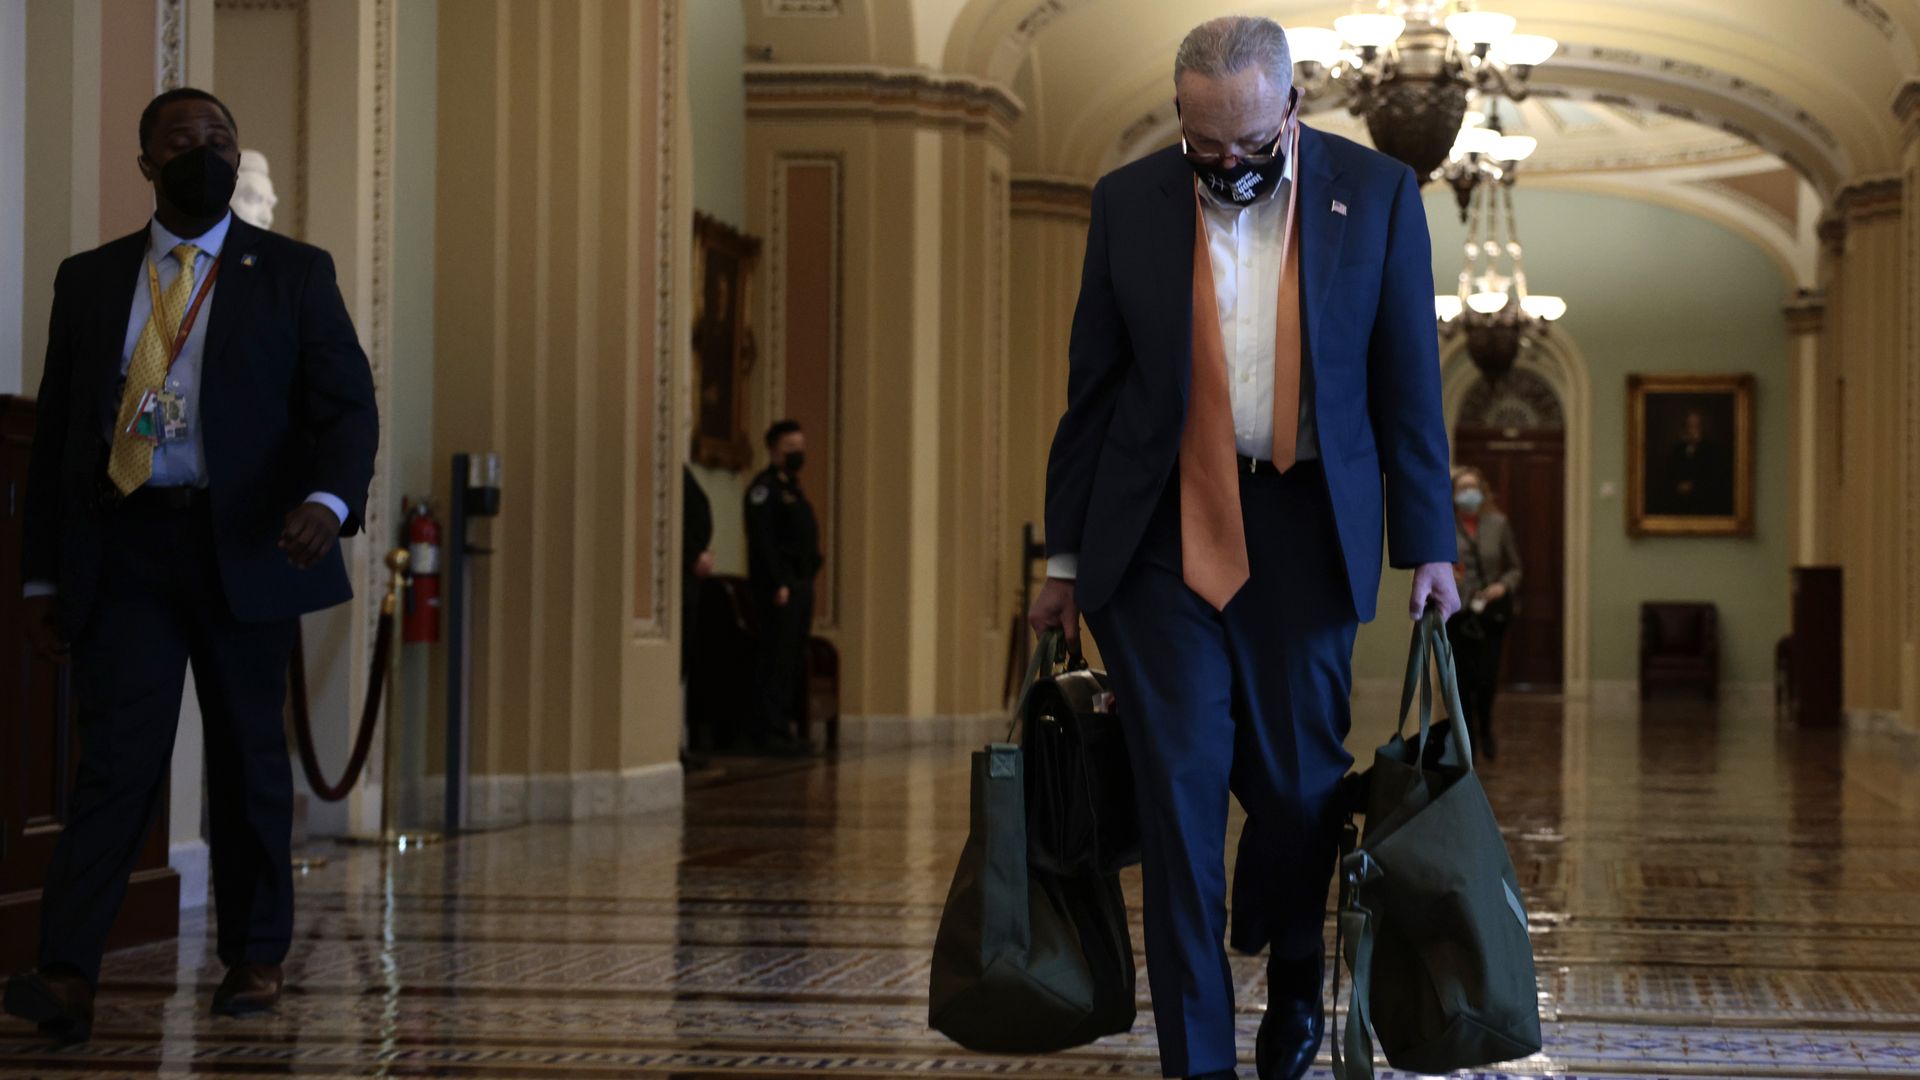 Senate Majority Leader Chuck Schumer is seen carrying his luggage as he returns to the Capitol on Monday.